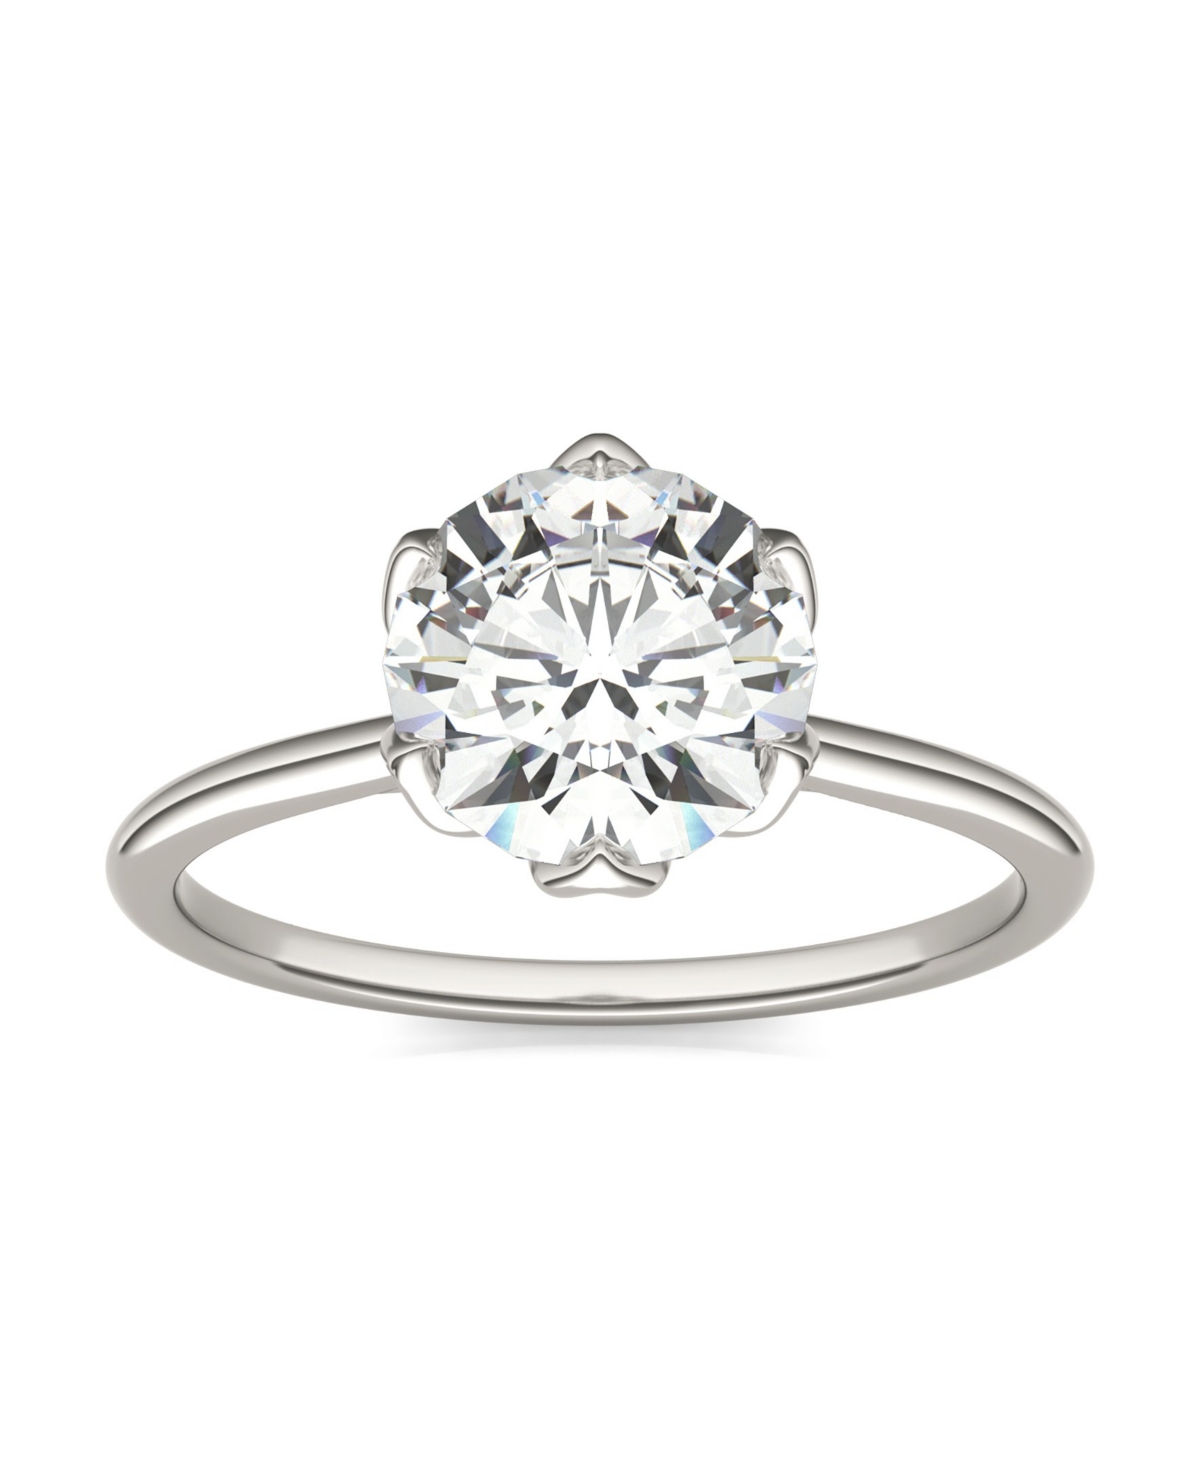 Moissanite Round Solitaire Ring (1-9/10 Carat Total Weight Diamond Equivalent) in 14K White Gold - White Gold